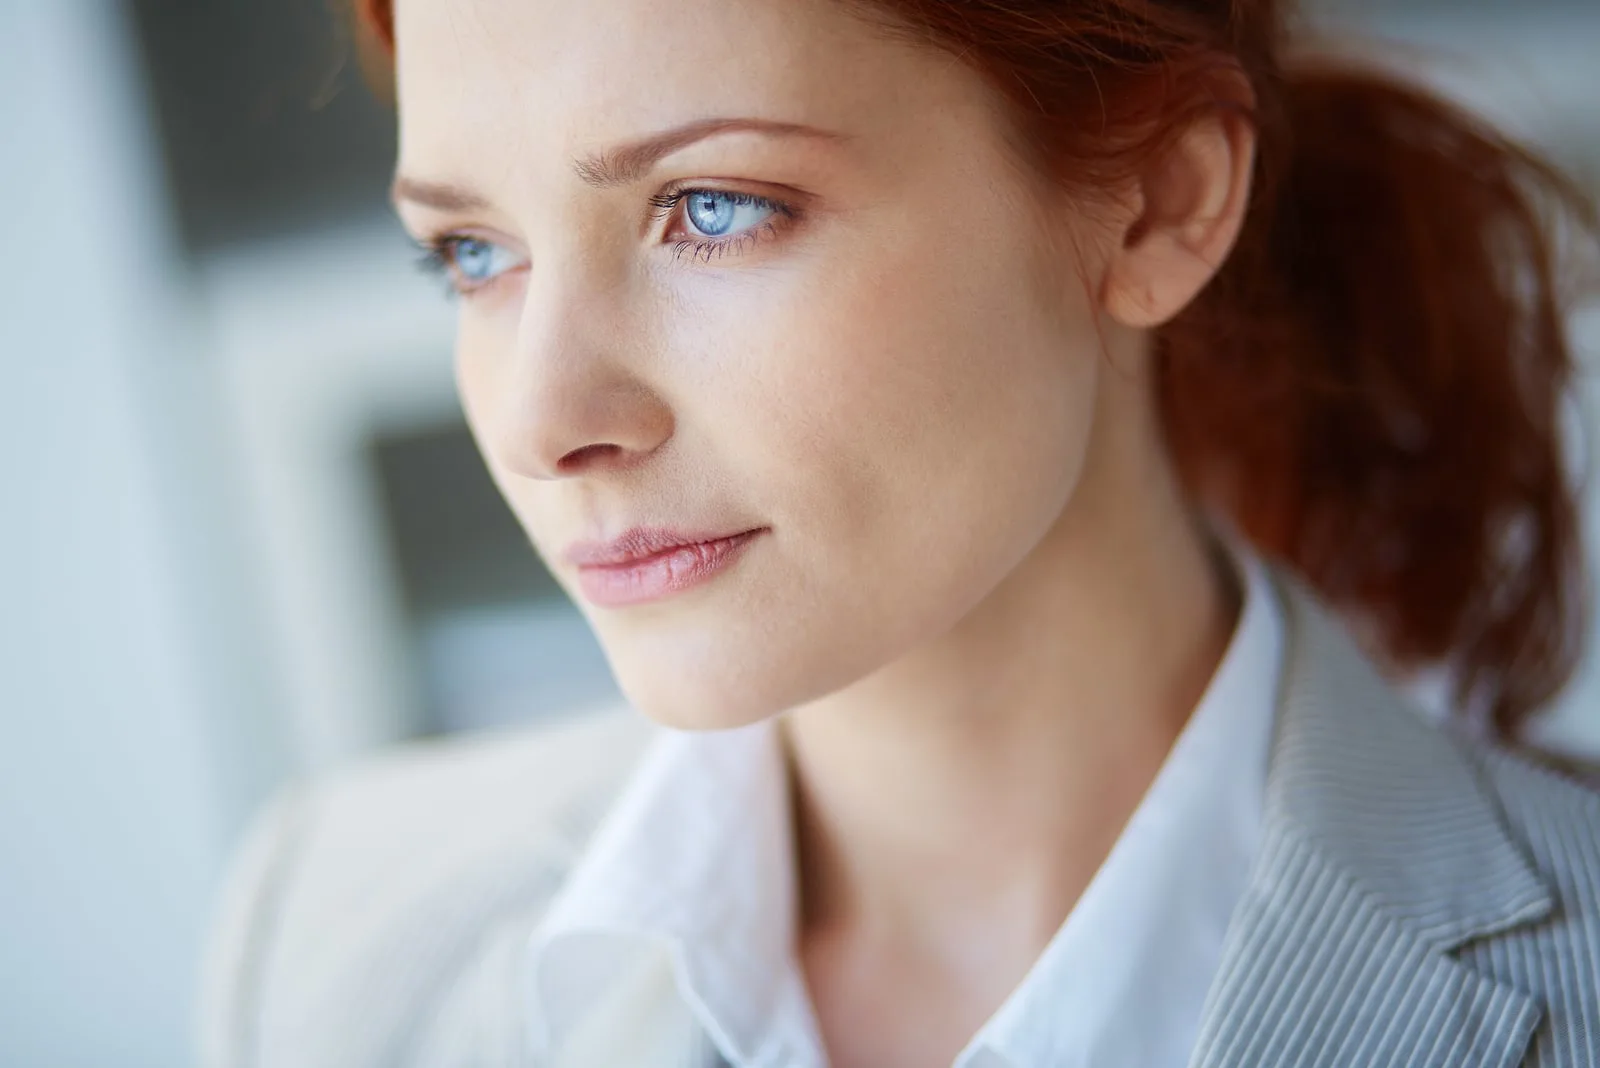 pensive woman with blue eyes